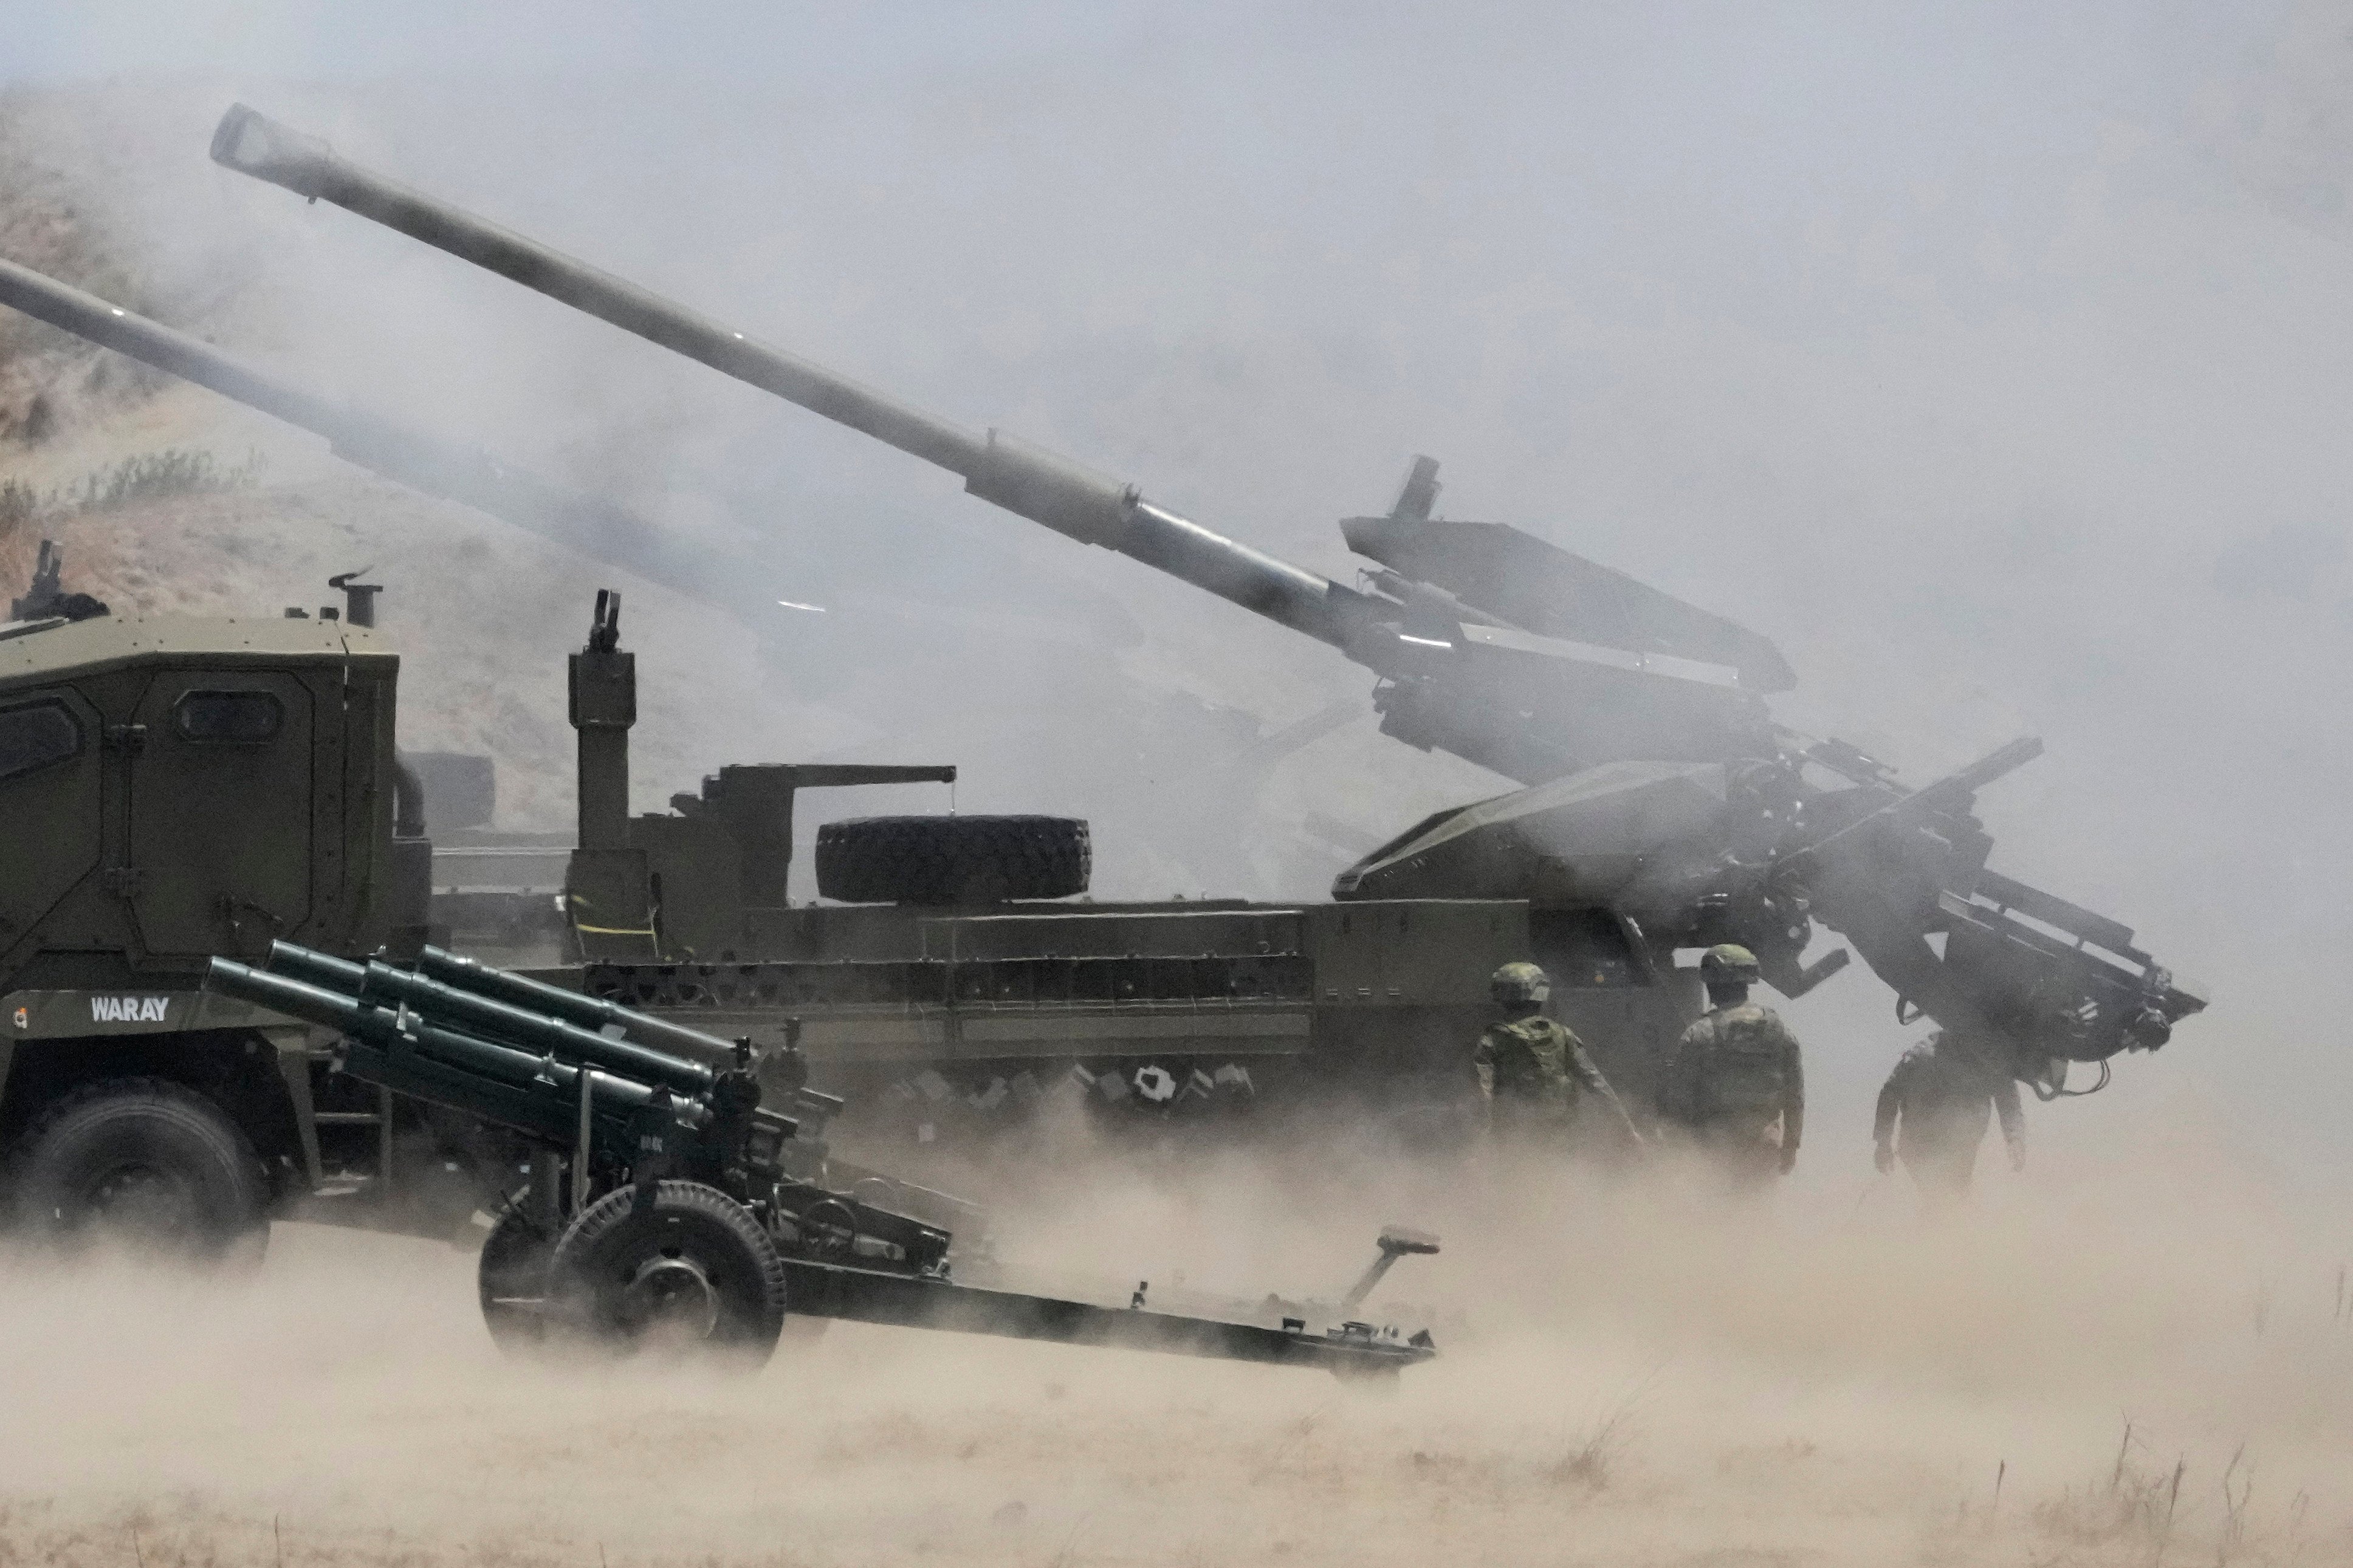 Dust billows as Philippine soldiers fire ATMOS 155mm howitzers during a joint military exercise on Wednesday in Laoag, Ilocos Norte, northern Philippines. Photo: AP